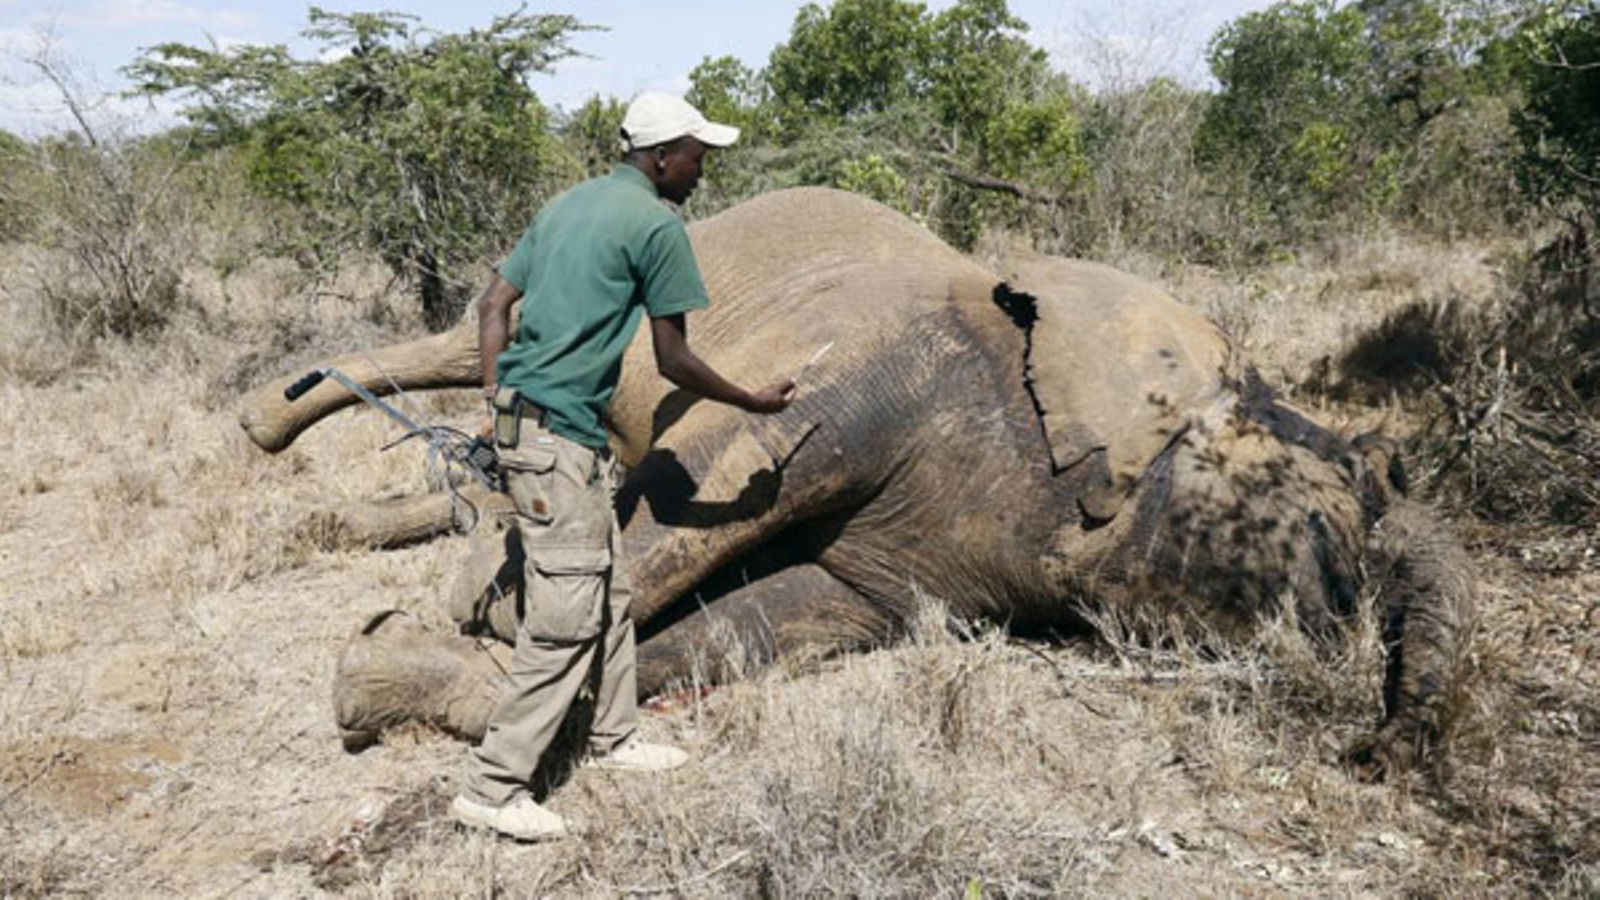 Giant Kenyan elephant killed by authorities on suspicion of